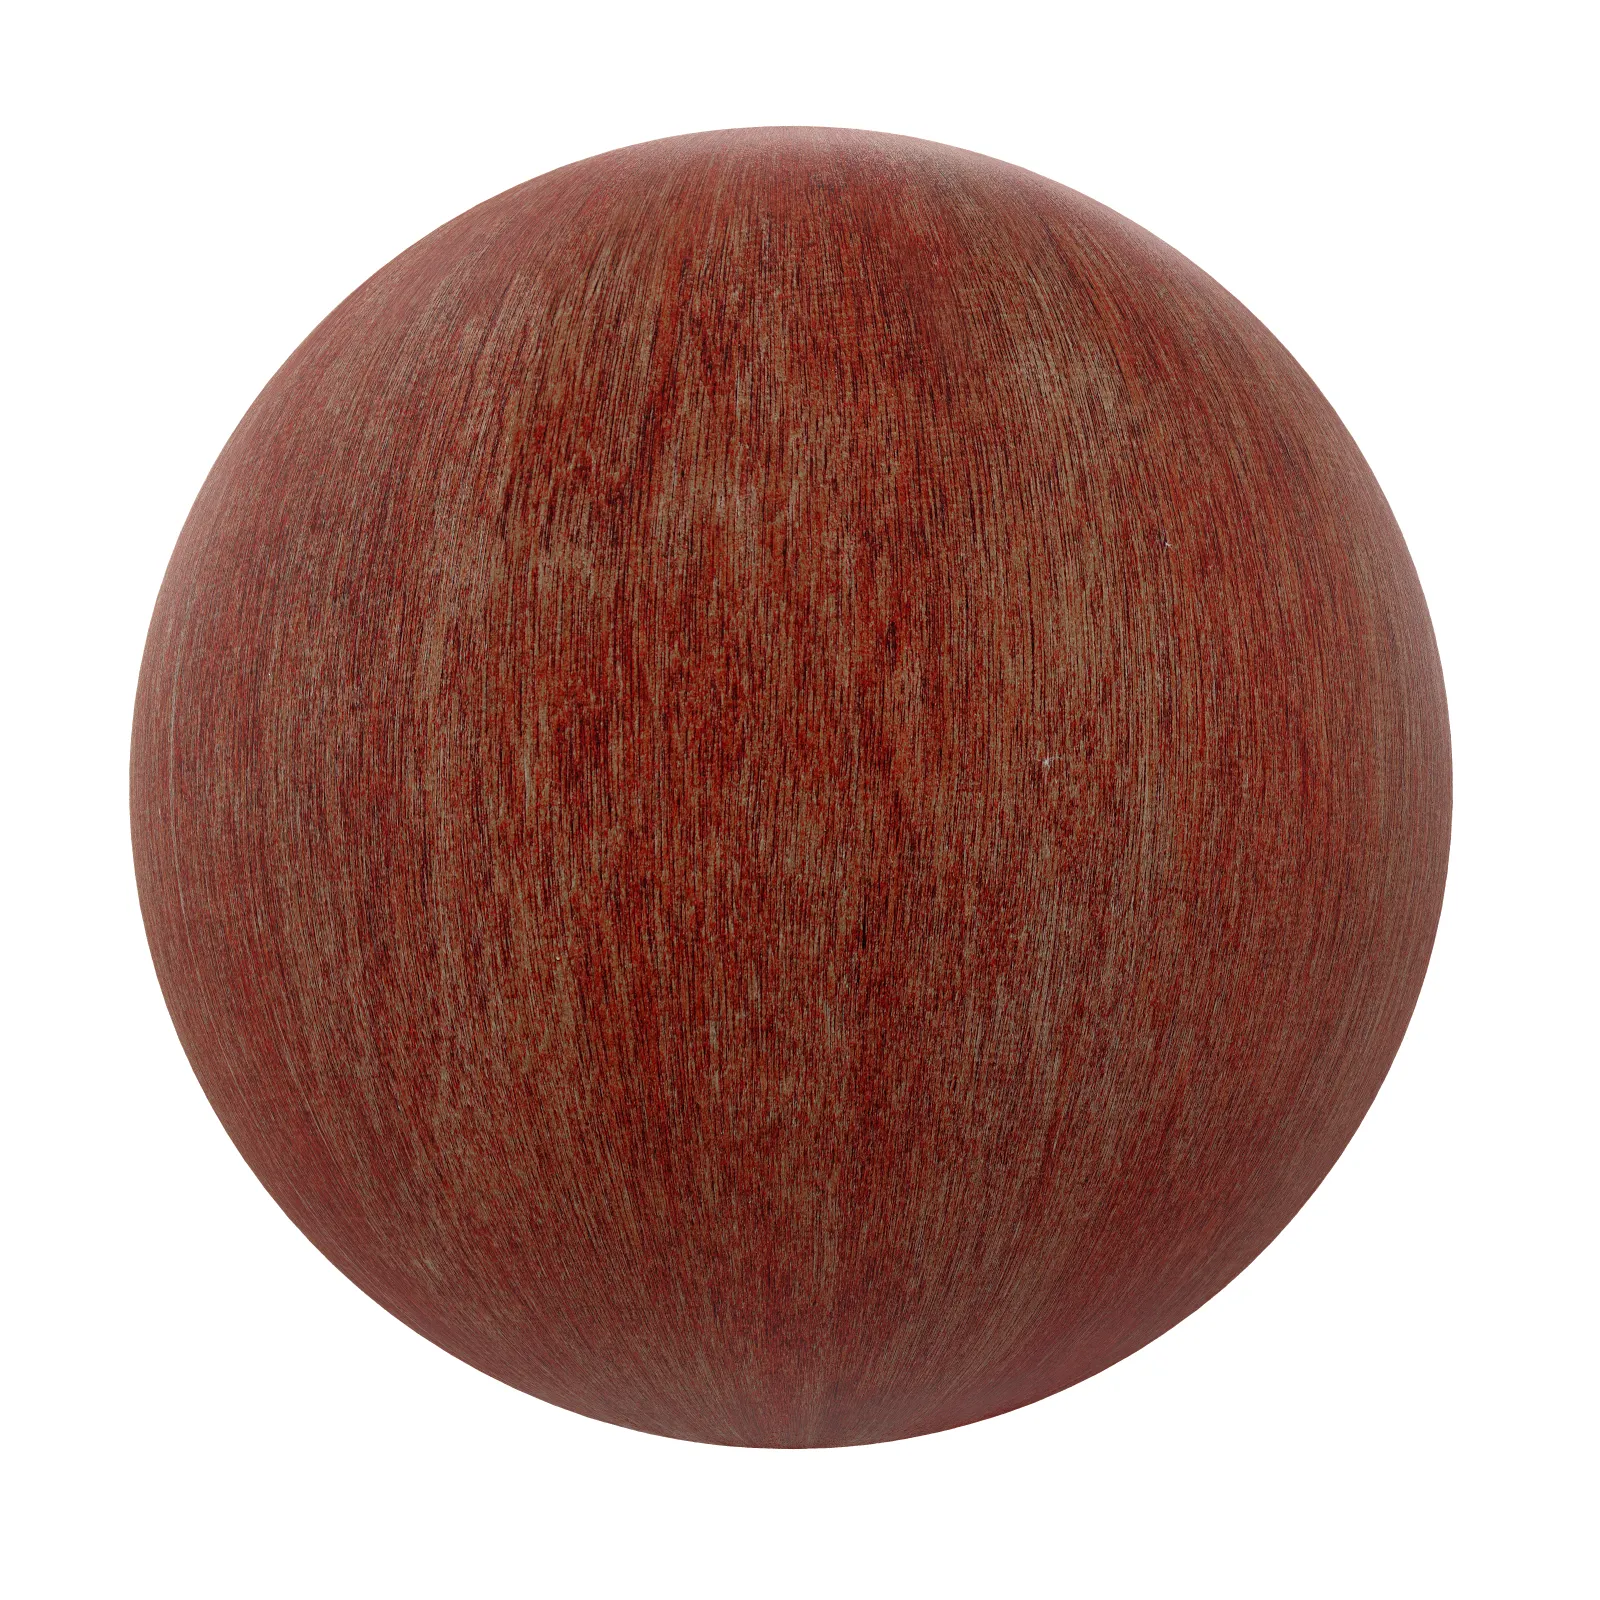 TEXTURES – WOOD – Red Painted Wood 2